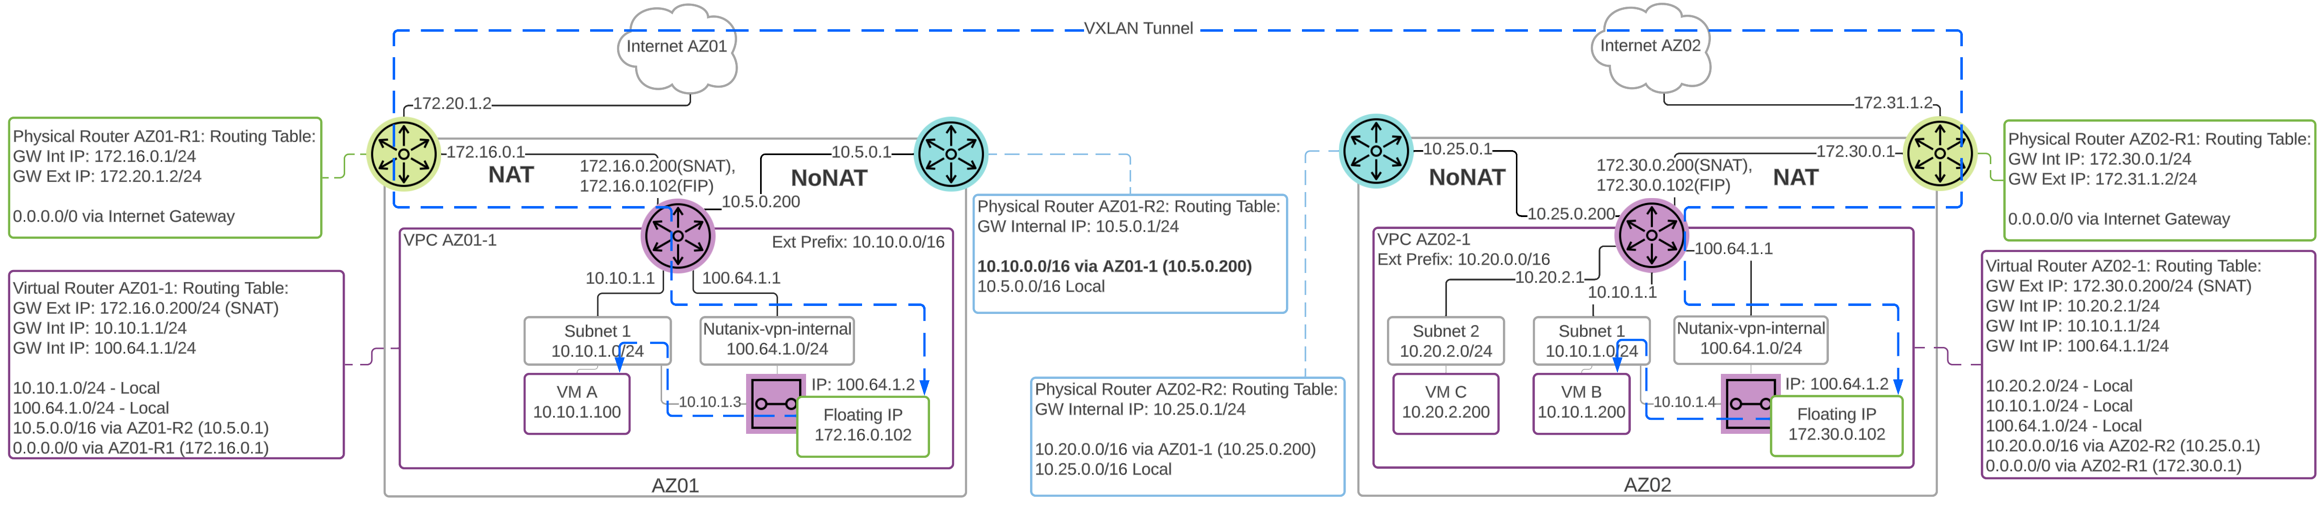 Flow Virtual Networking - Subnet Extension Routed VPC Detail